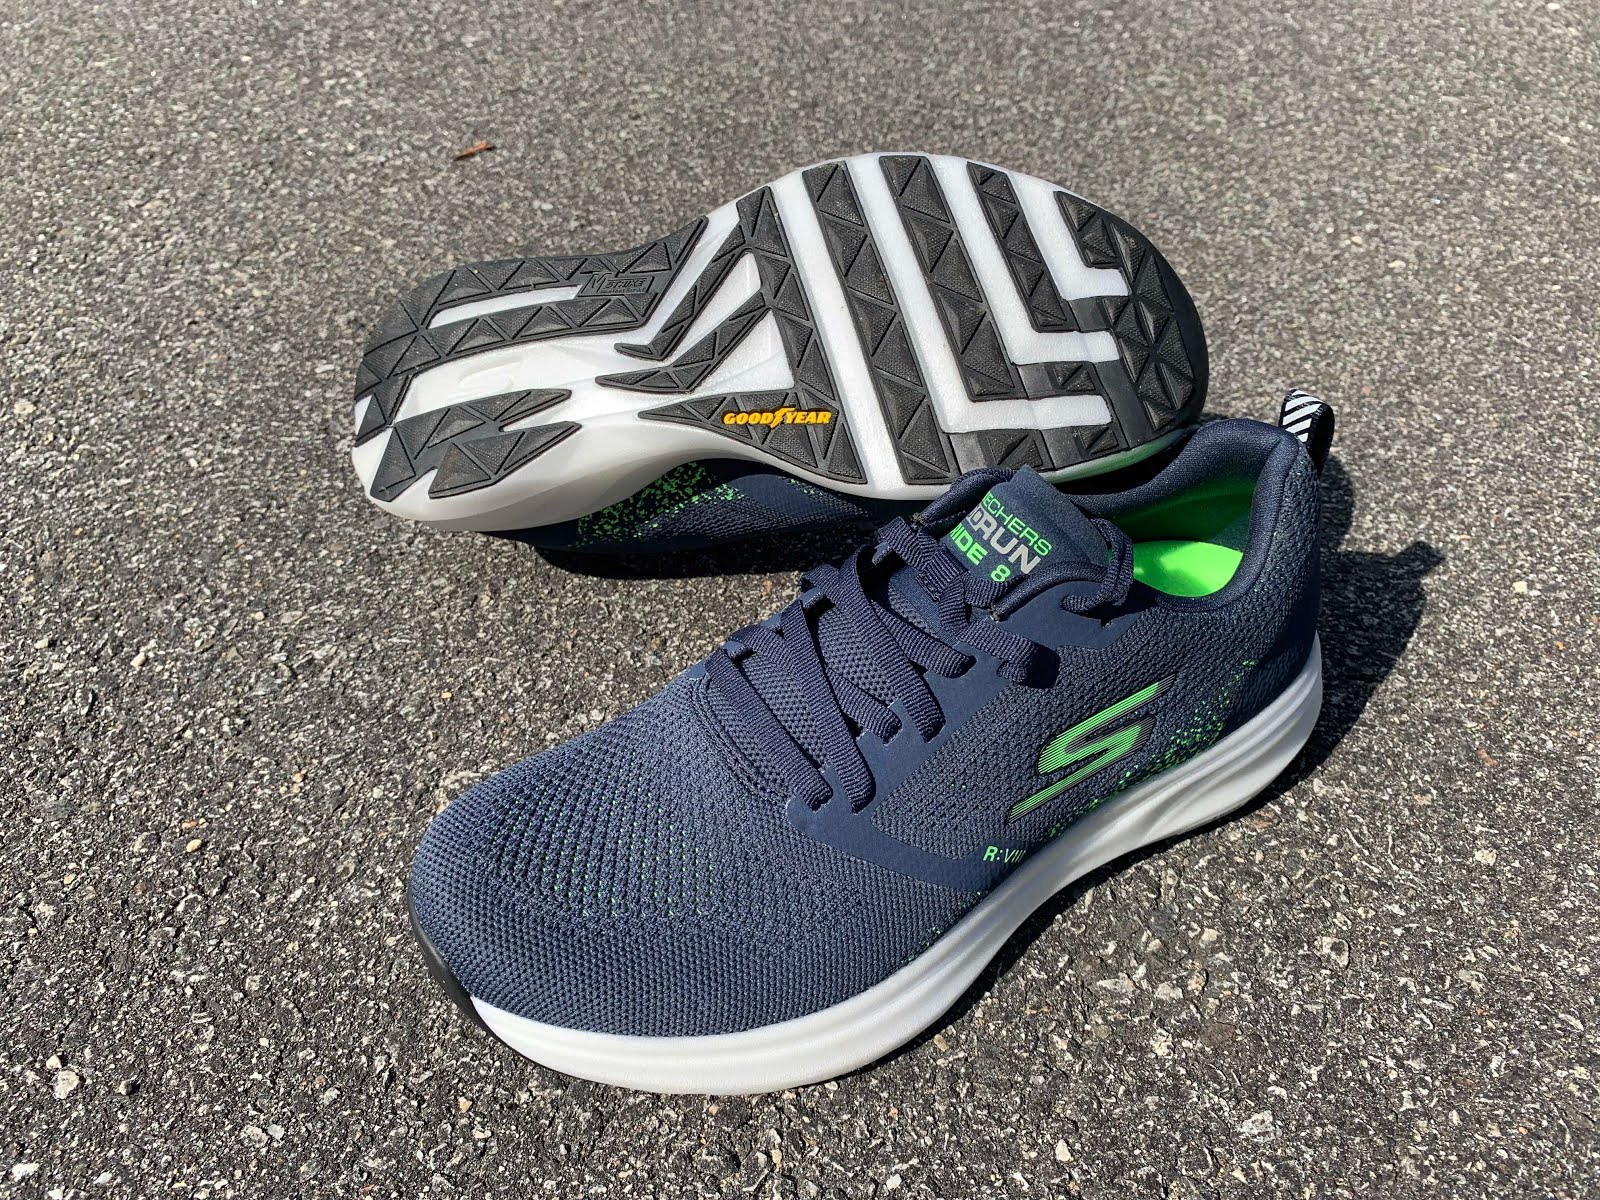 Road Trail Skechers Performance GO RUN RIDE 8 HYPER Initial Video Review, Details, and Comparison other 2019 Skechers